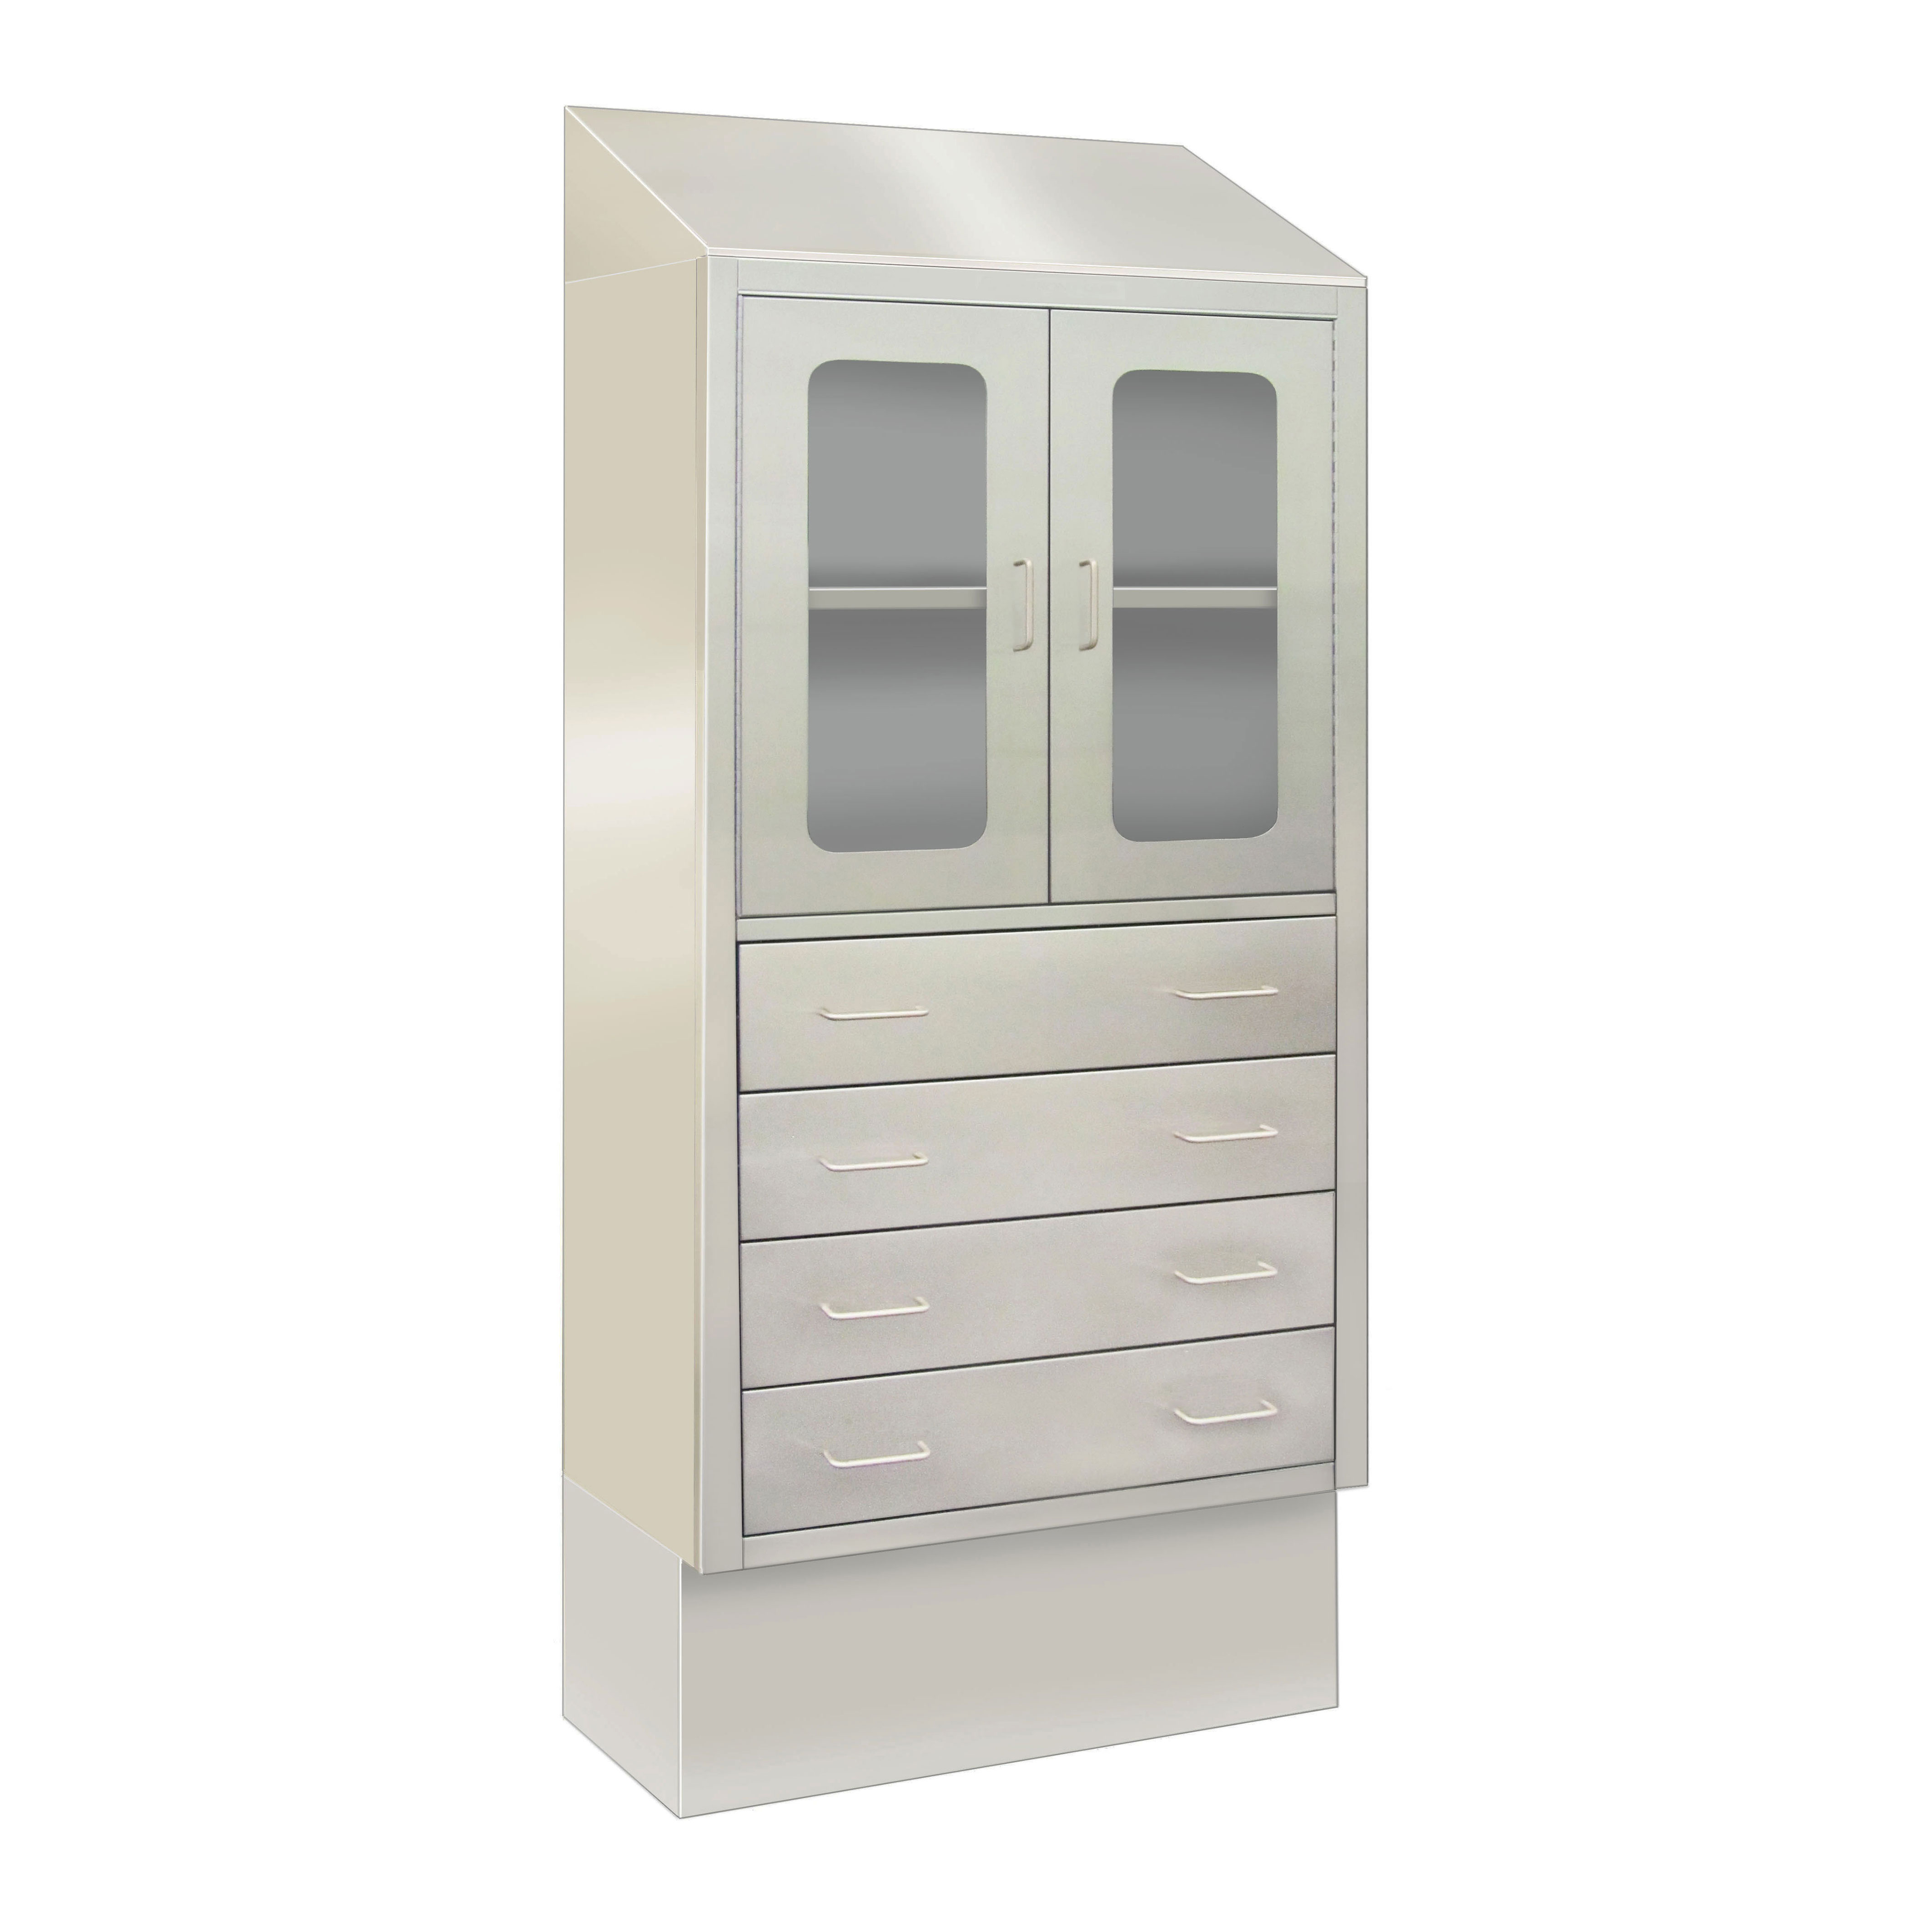 SURGICAL BI-STORAGE CABINETS Two ways to store 1: Shelves behind doors 2: Drawers. Many sizes, recess or surface mount.